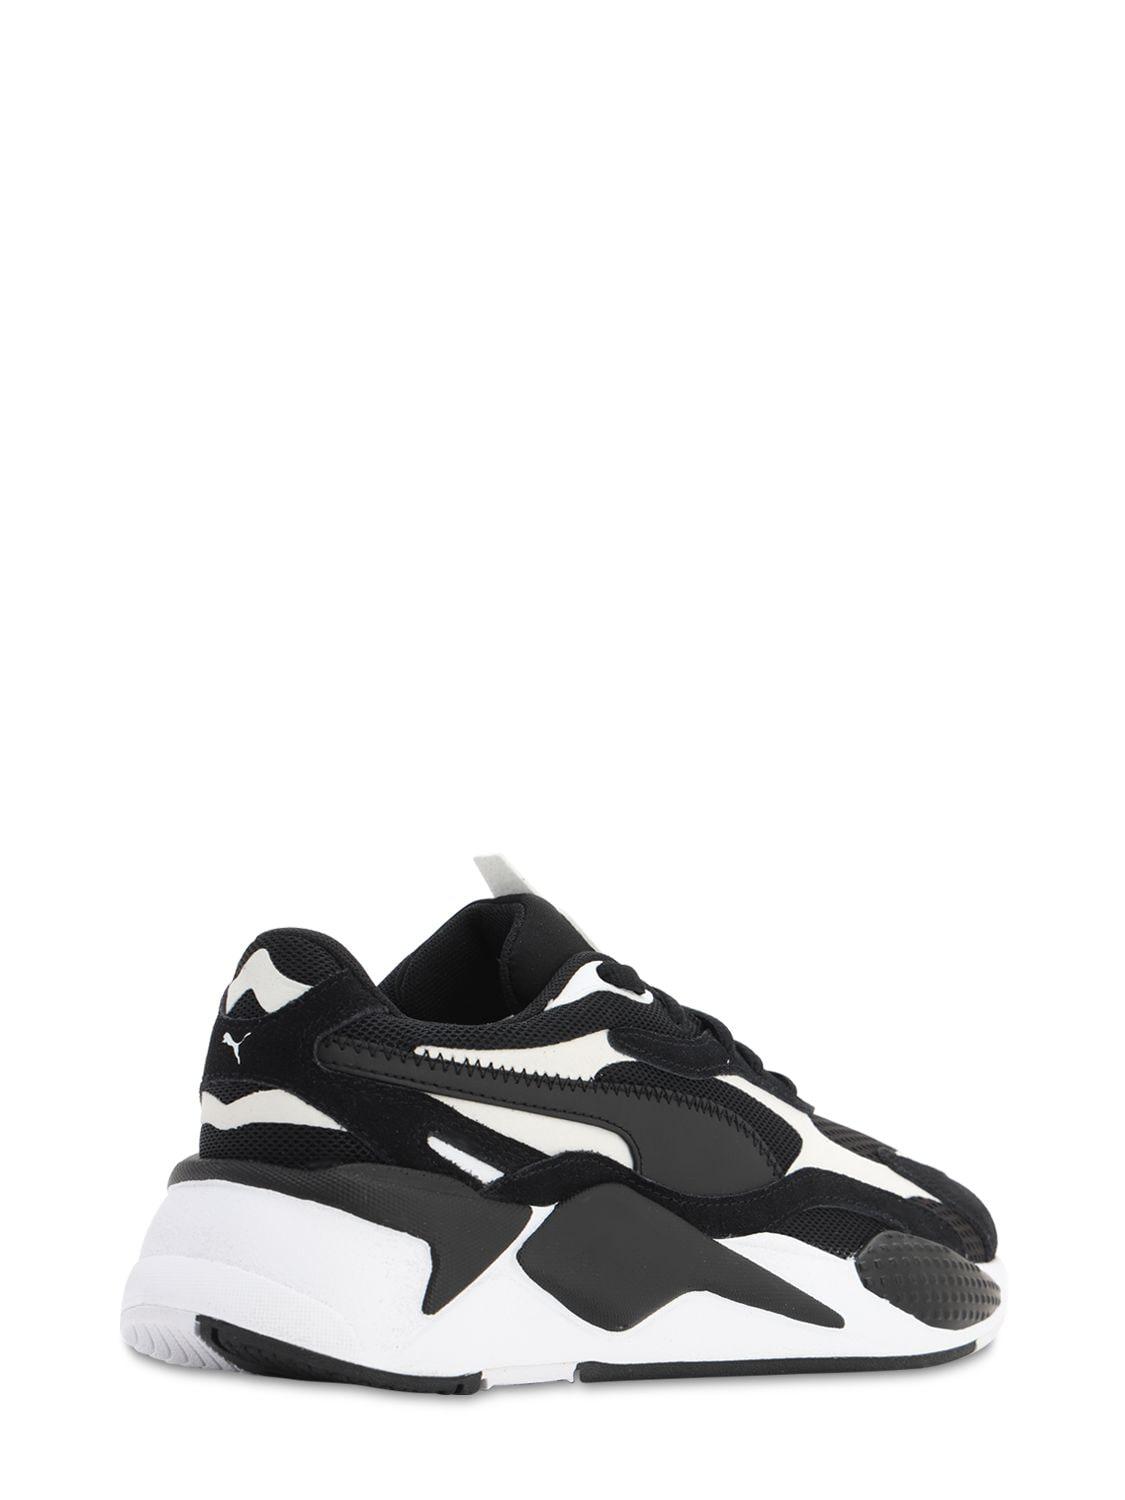 Puma Select Rs-x3 Play Sneakers in Black/White (Black) for Men - Lyst